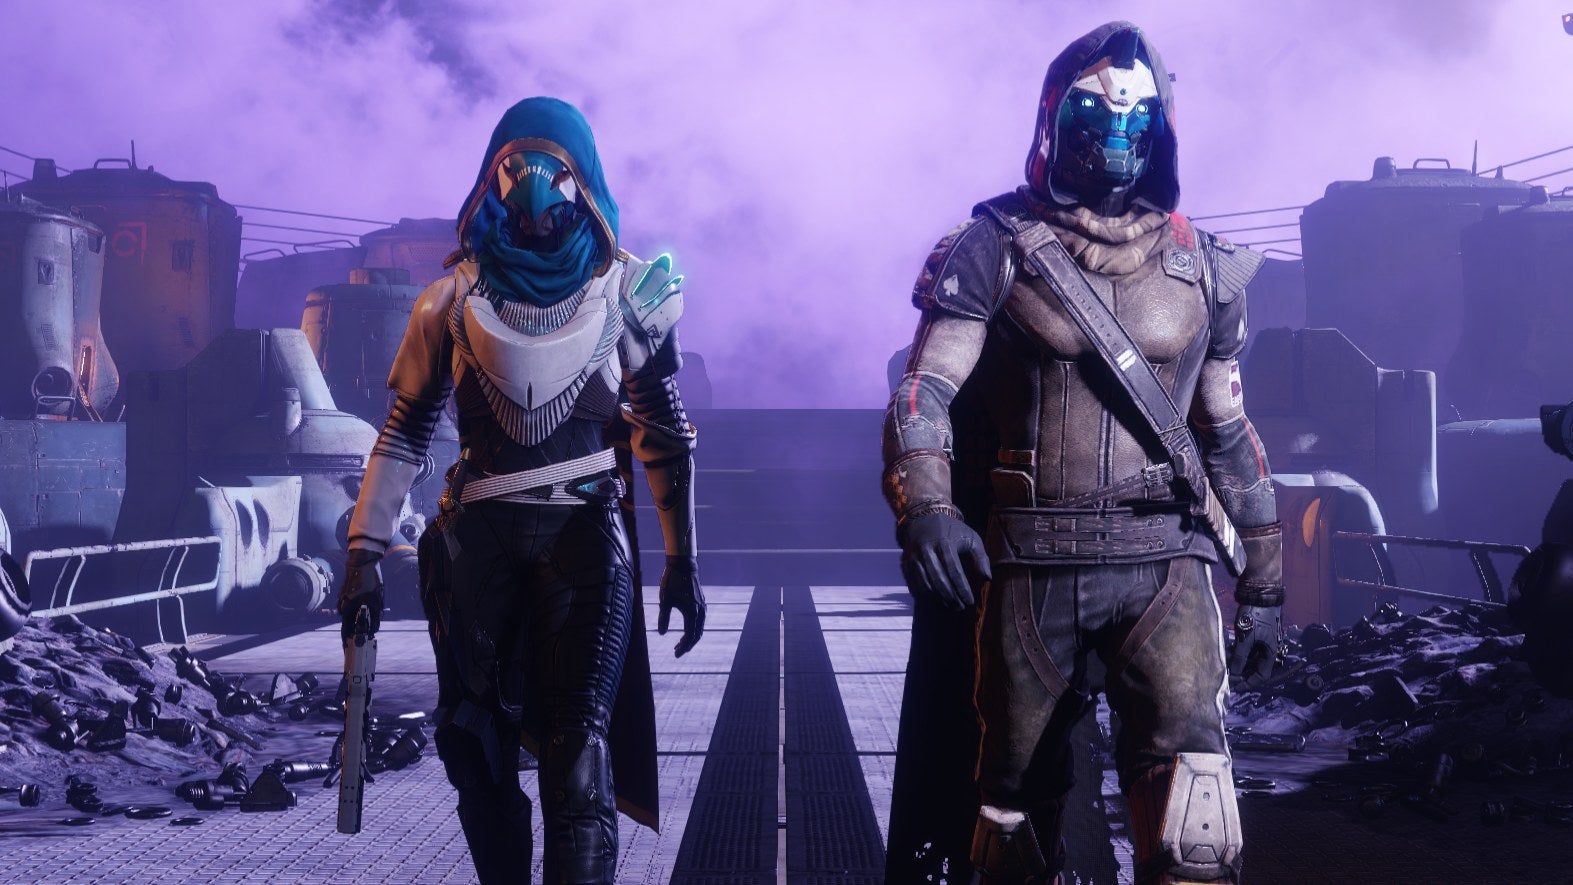 My Hunter and Cayde-6 strolling into the Prison of Elders in a Destiny 2 sc...